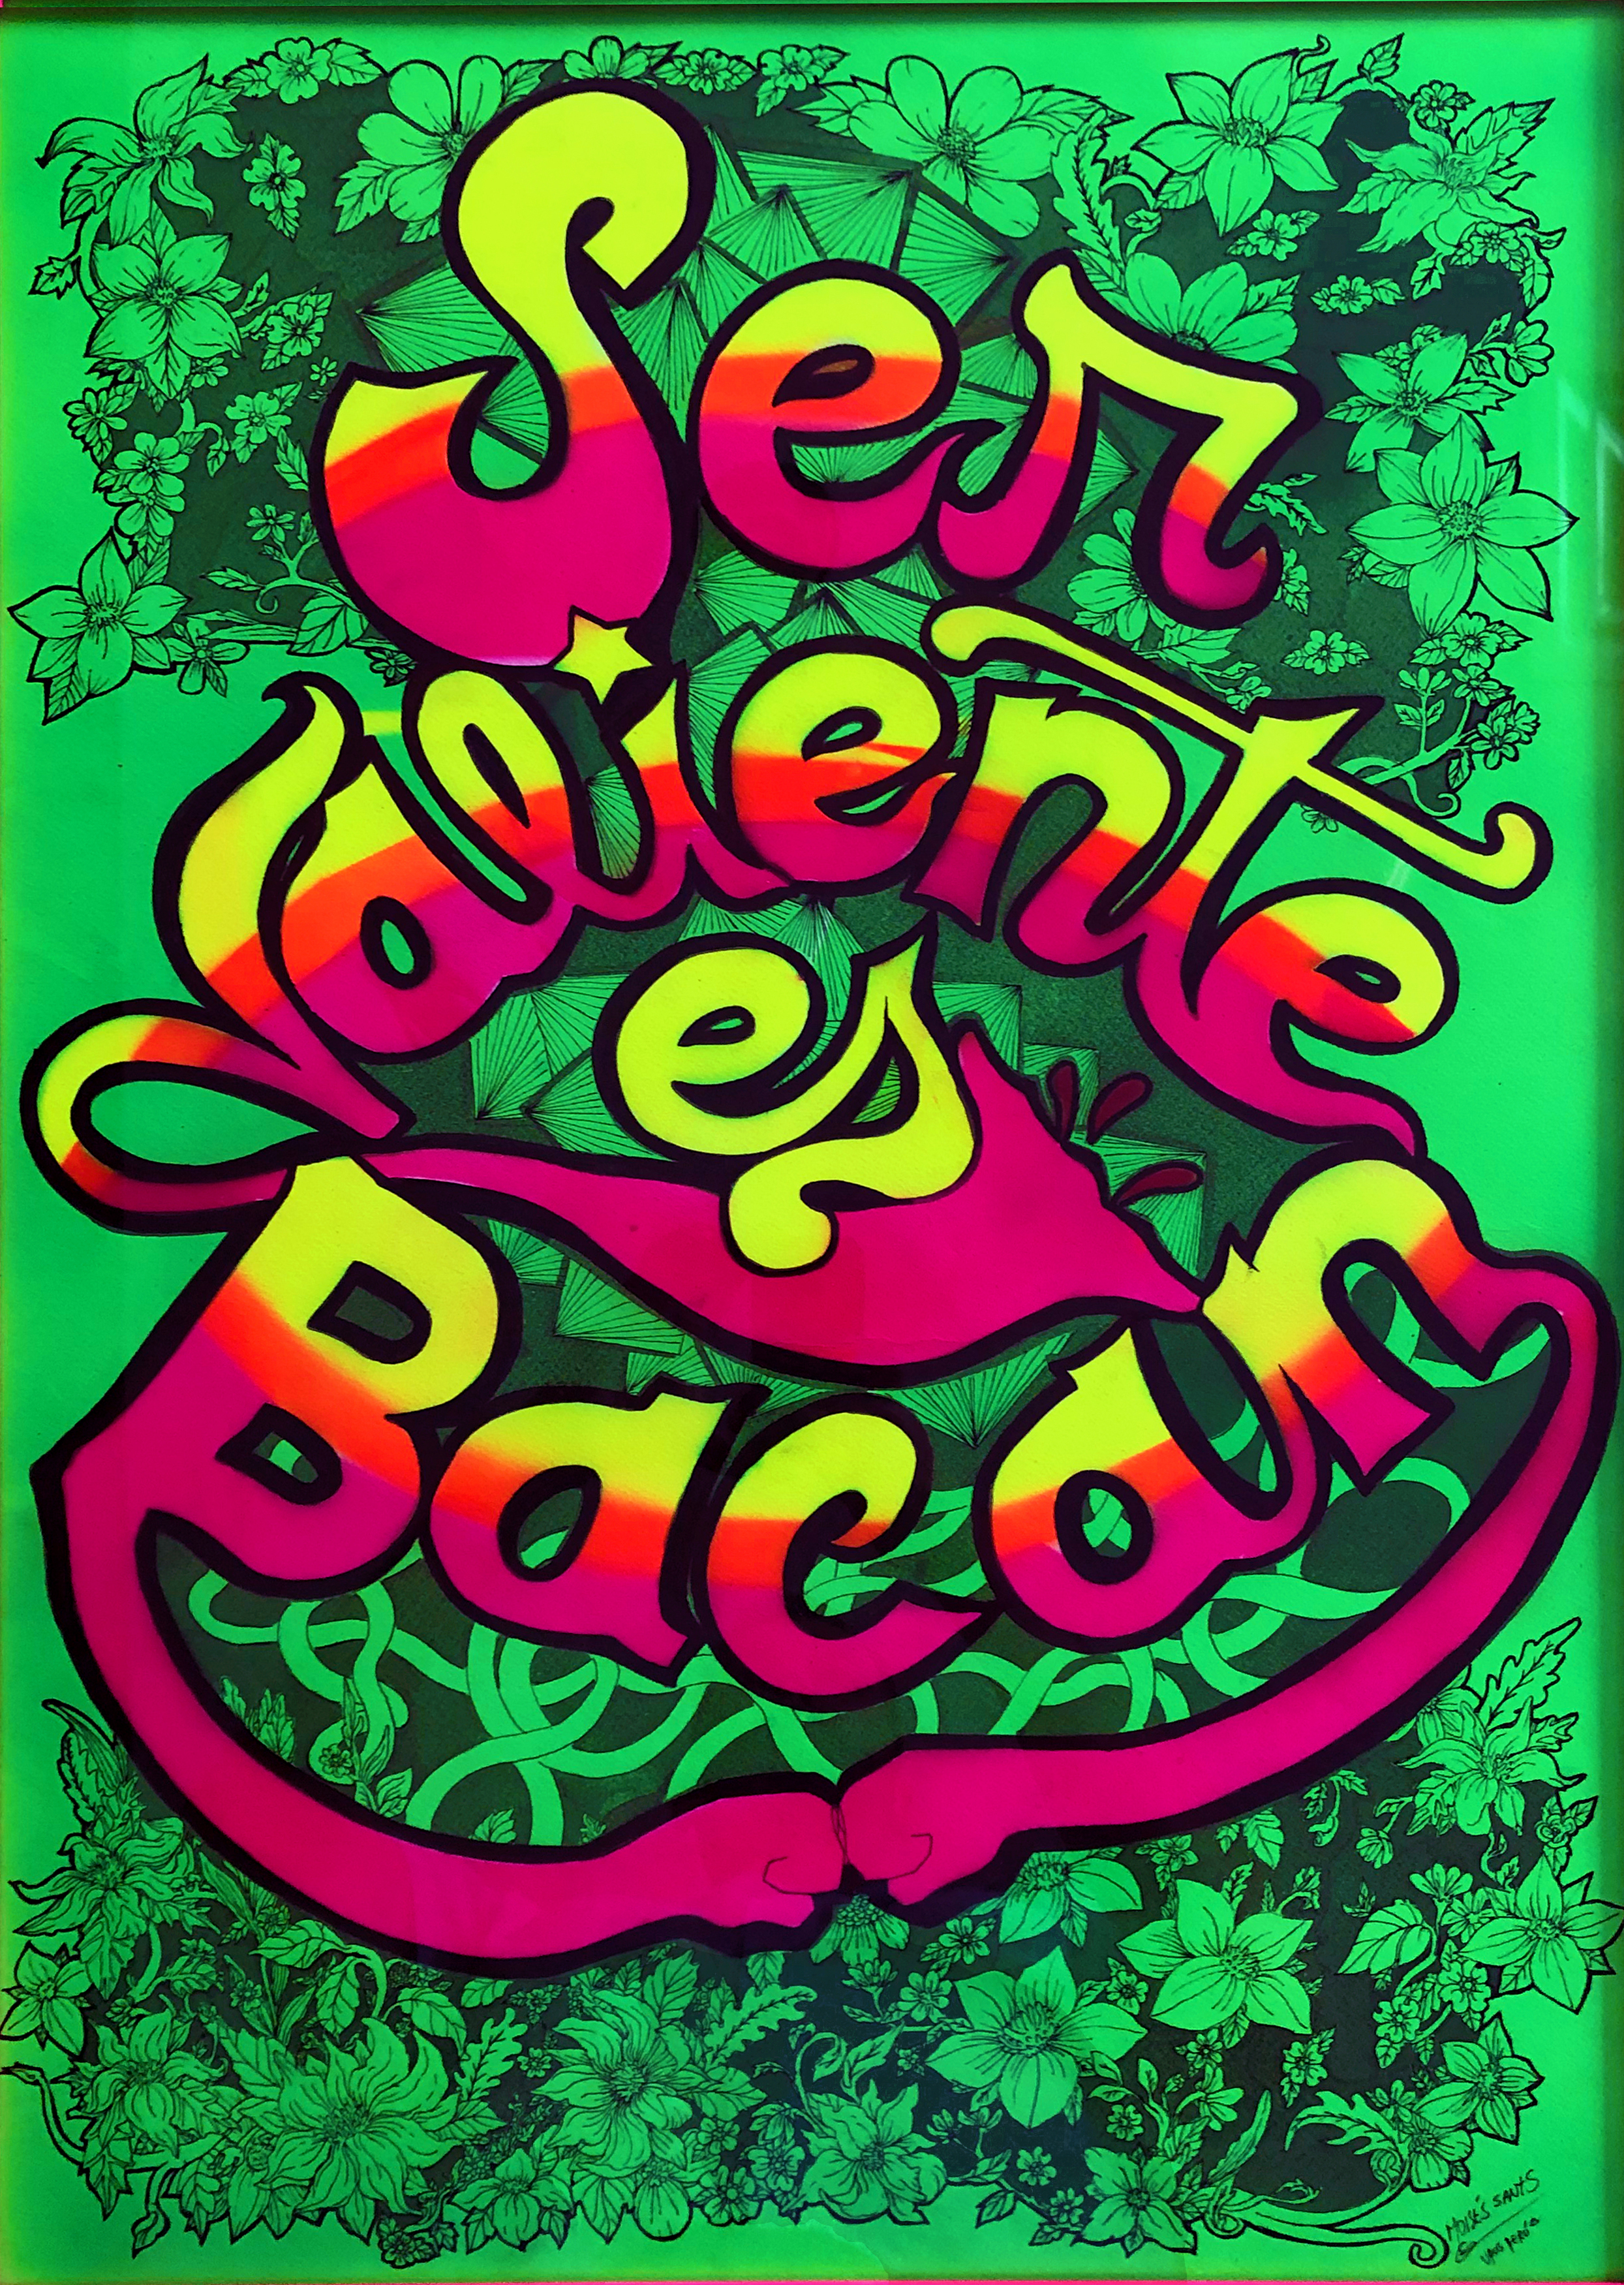 screenprinted poster with bright green and pink illustration of text reading "Ser valiente es Bacan"